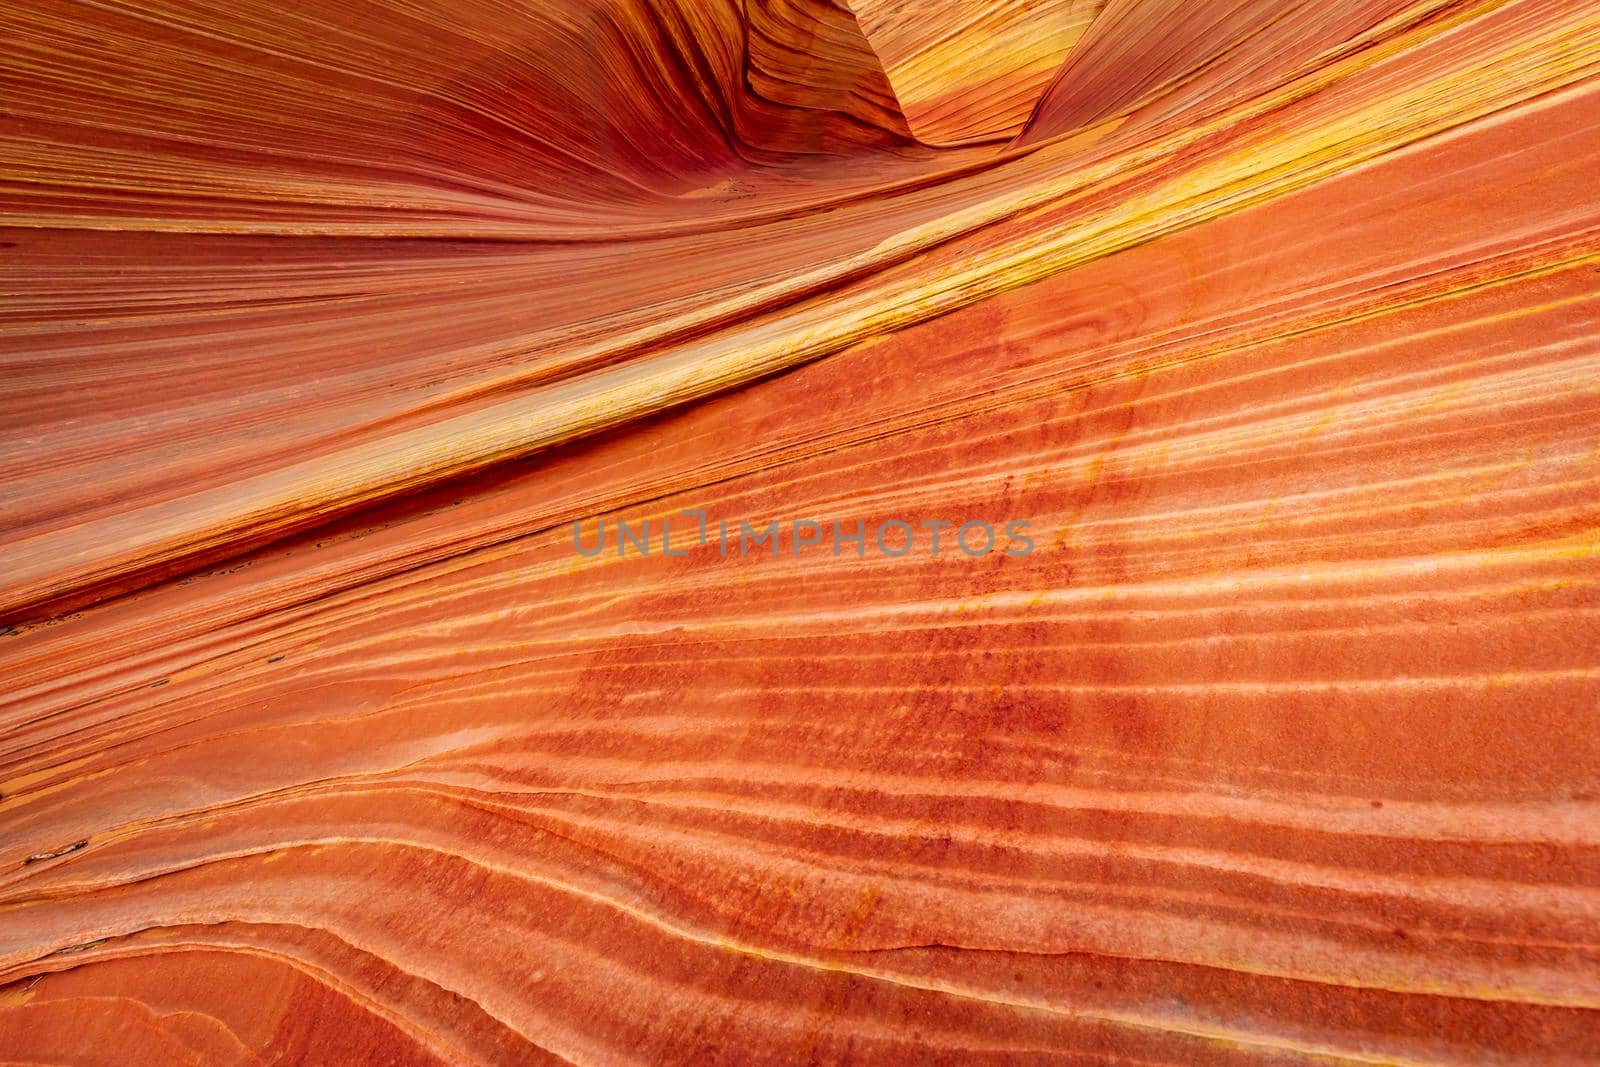 The Wave is a famous sandstone rock formation located in Coyote Buttes, Arizona, known for its colorful, undulating forms